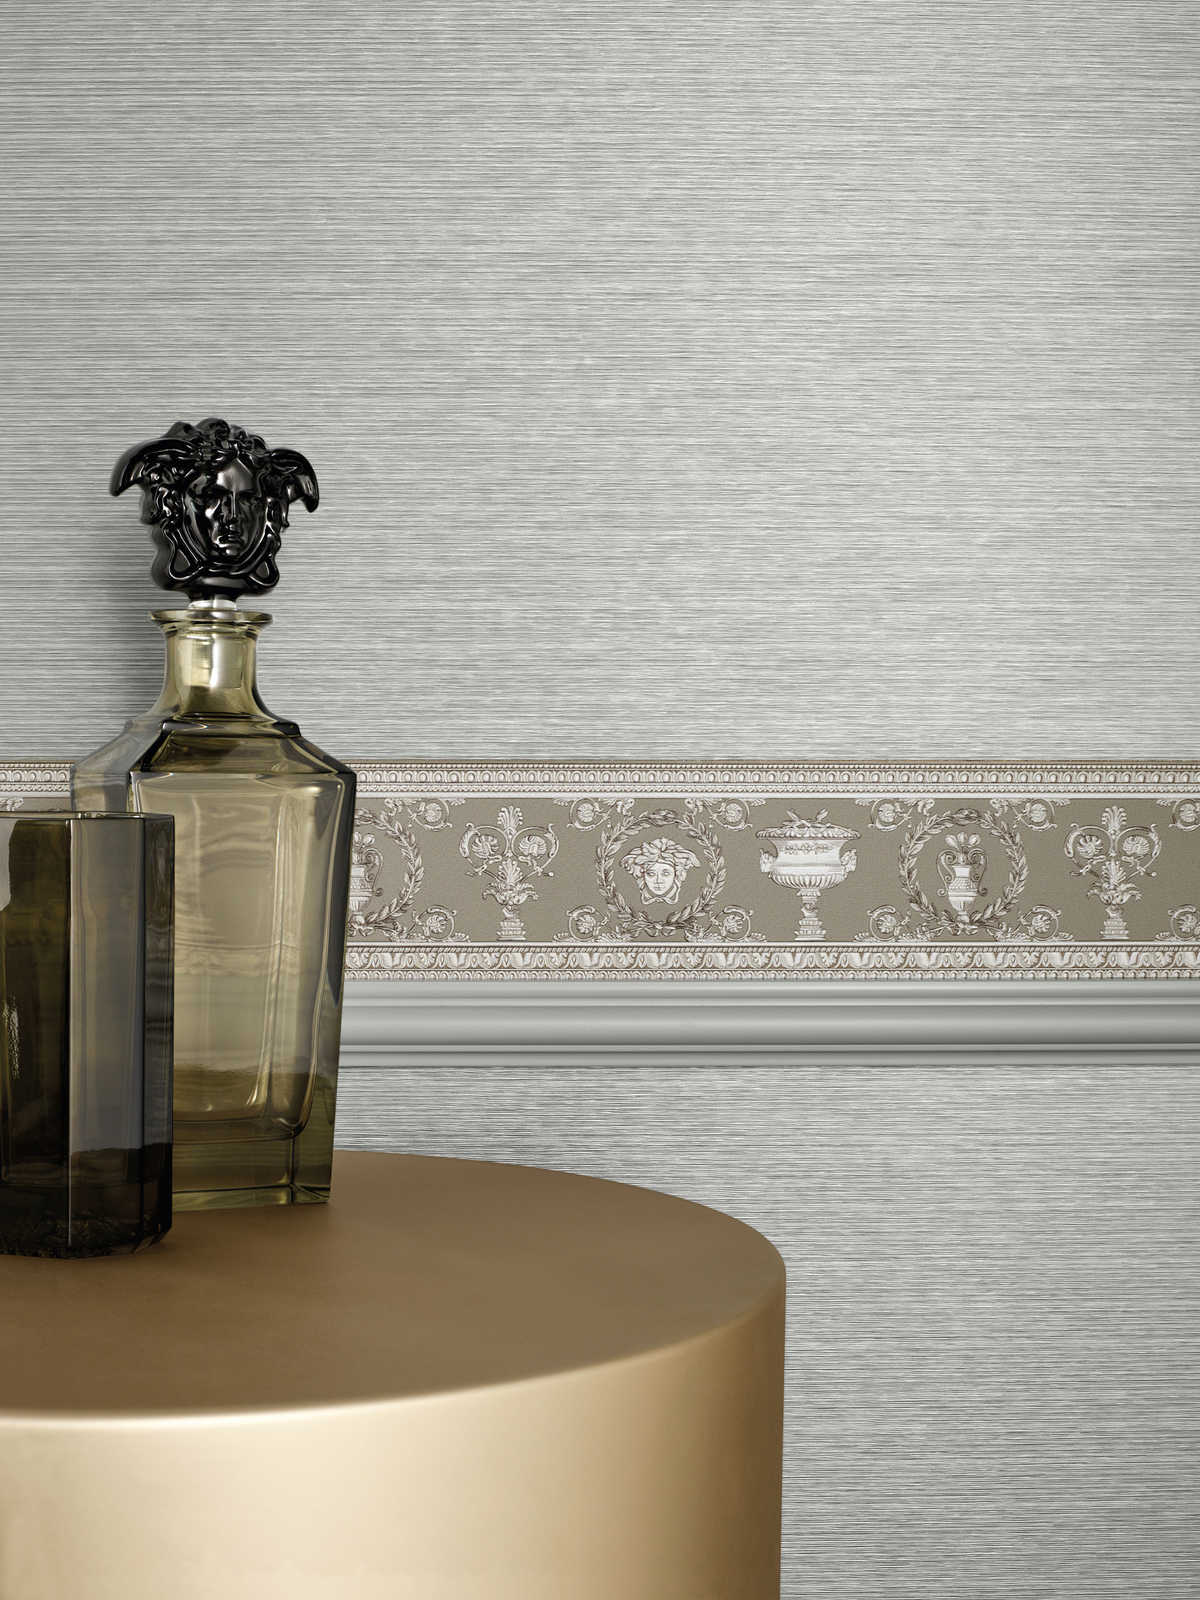             Mottled non-woven wallpaper with metallic accents - silver, grey
        